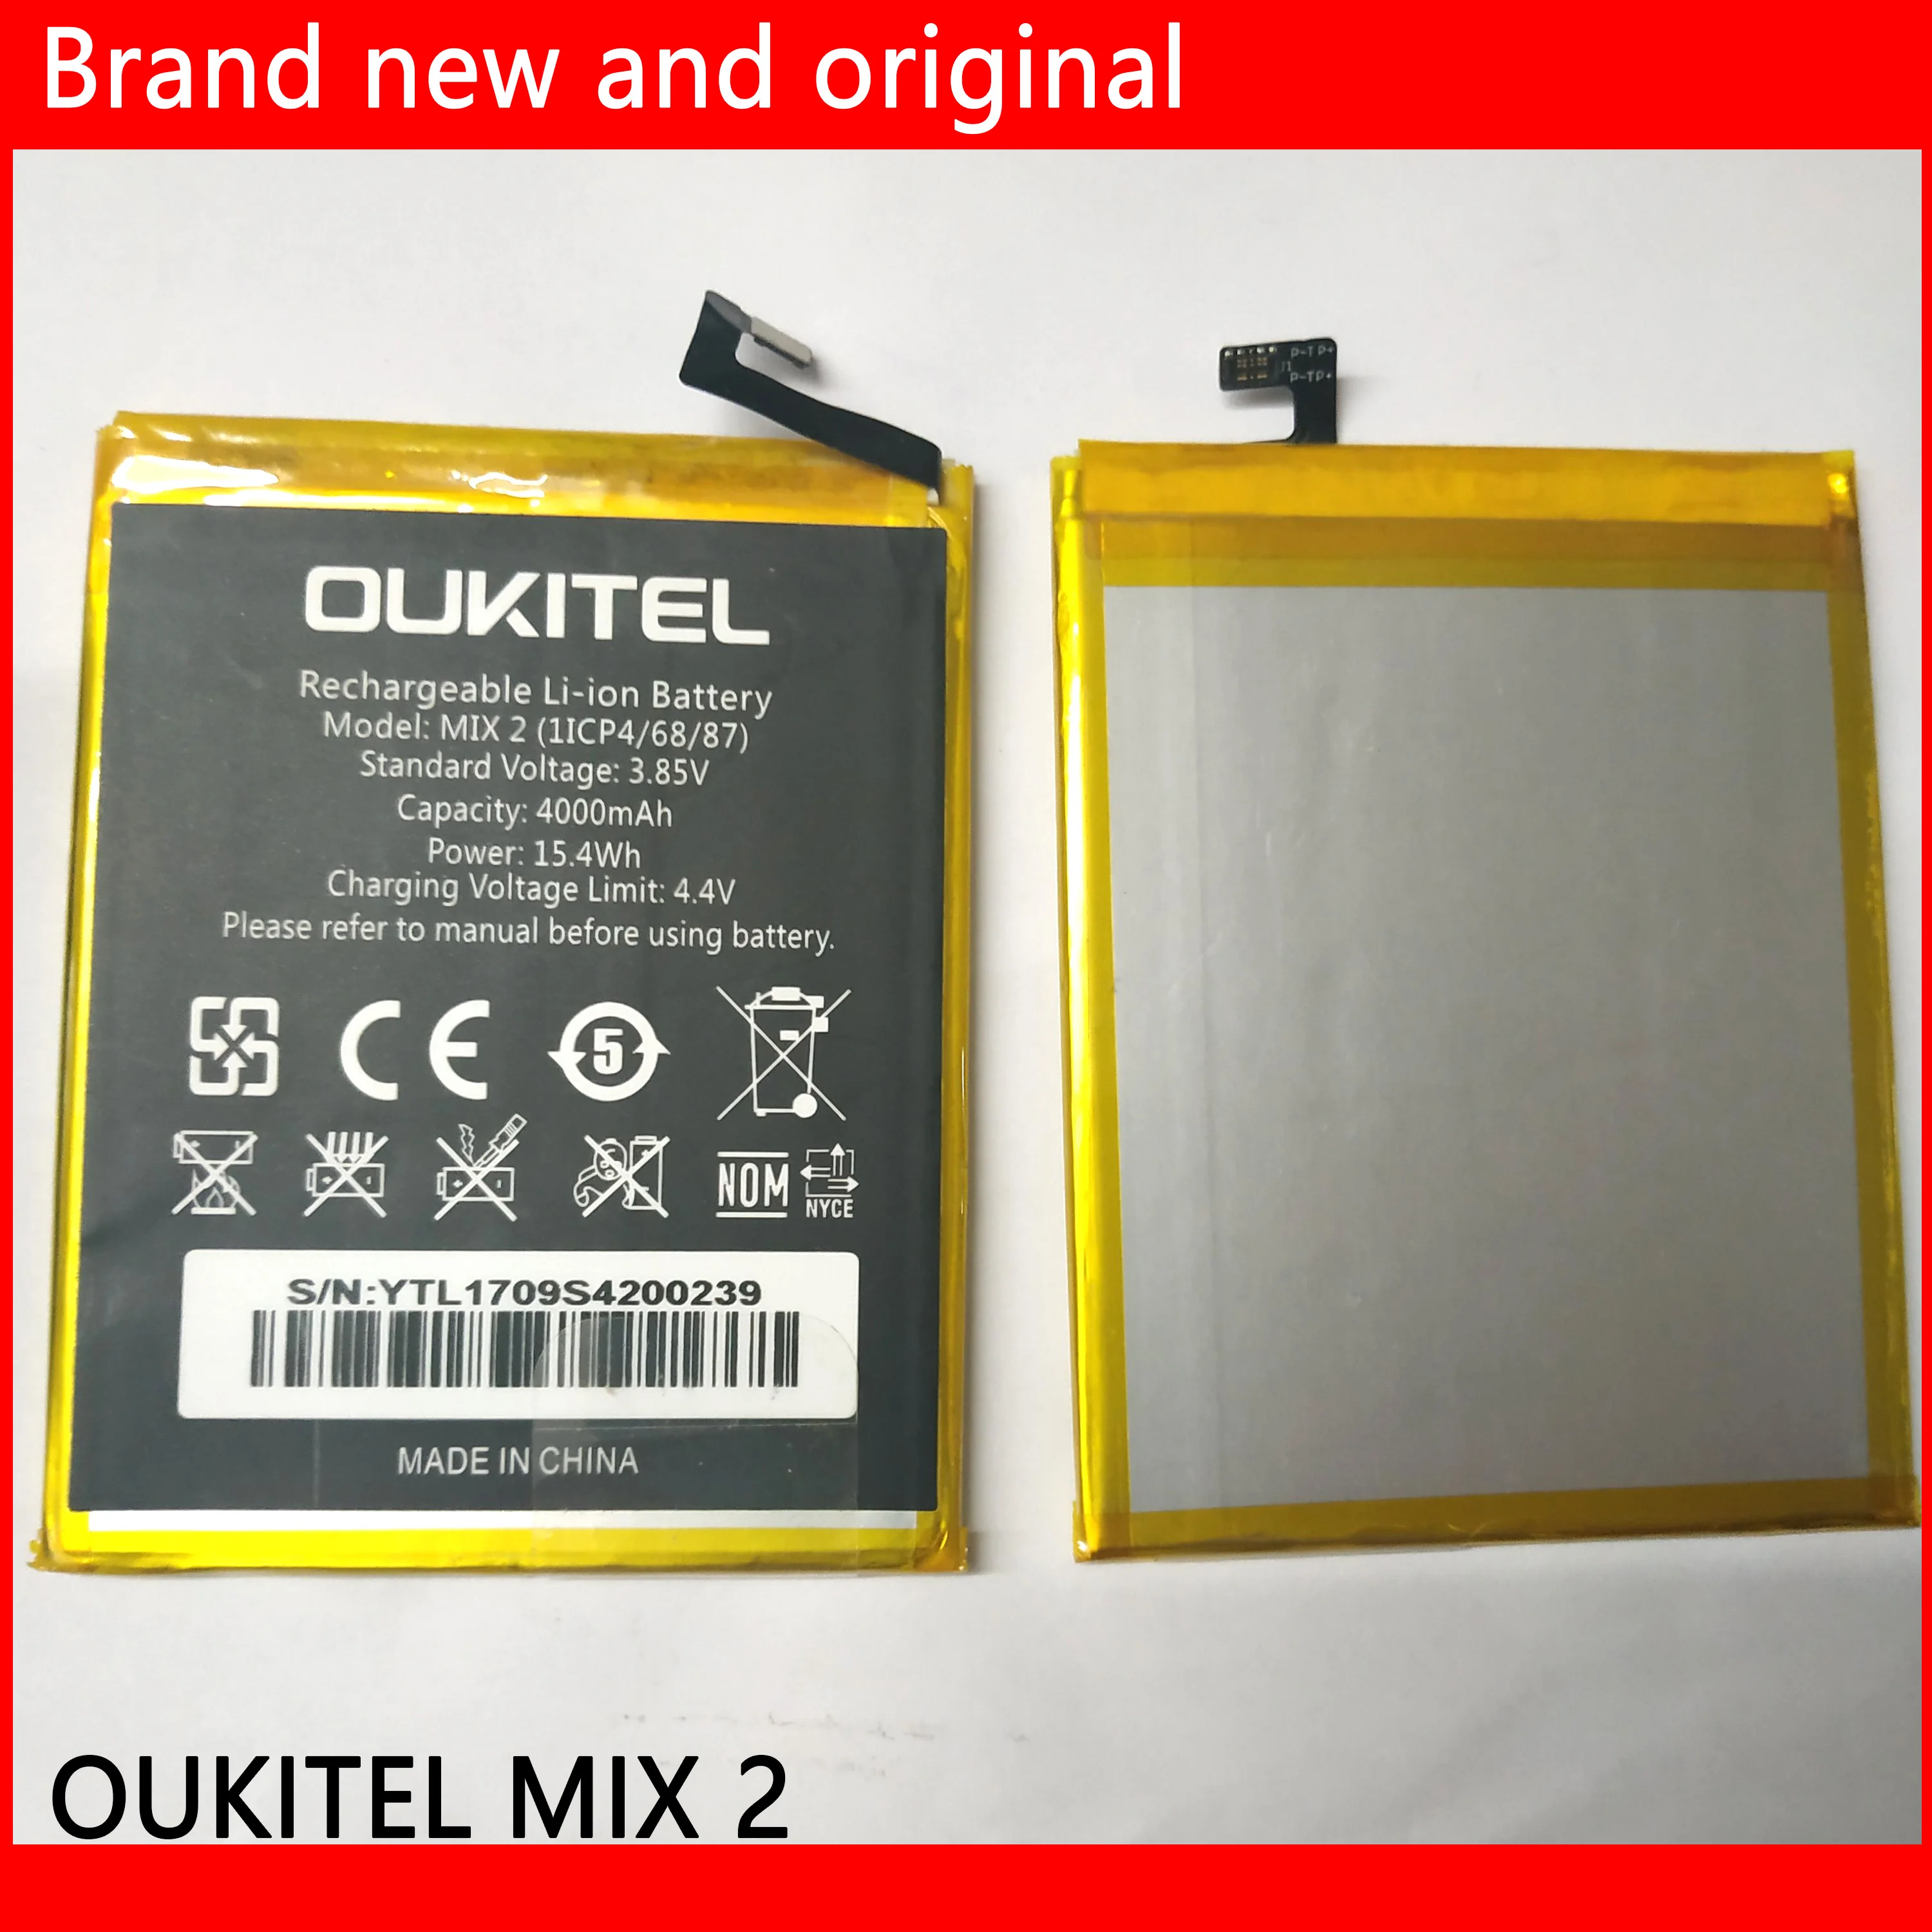 

Brand New and Original 4080mAh OUKITEL MIX2 Battery for Oukitel MIX 2 Mobile Phone +Tracking